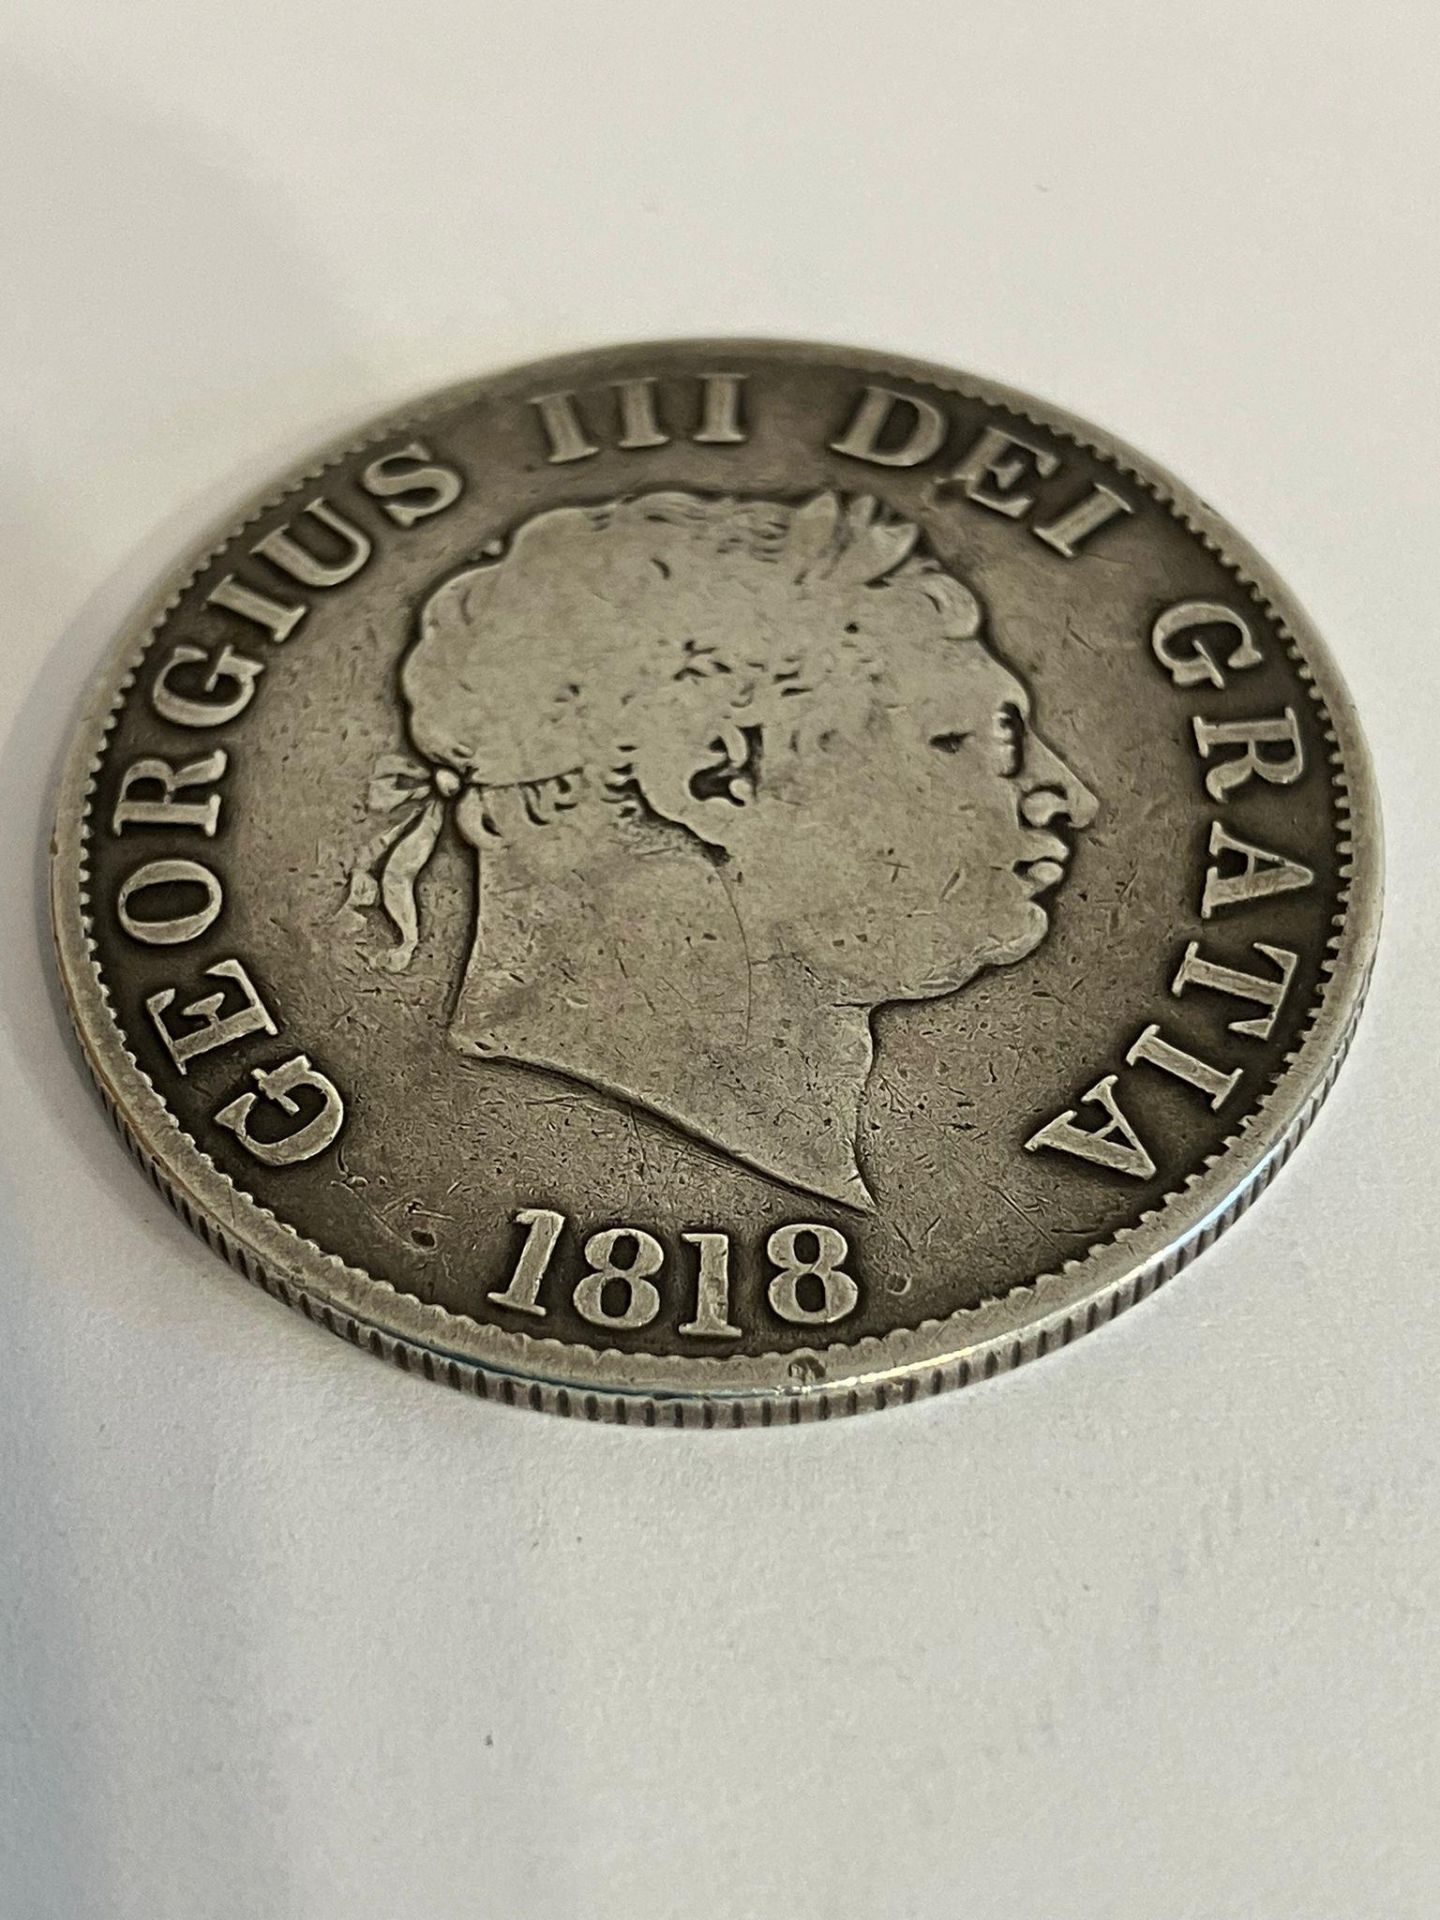 GEORGE III SILVER HALF CROWN 1818. Fine/very fine condition. Clear detail to both sides.